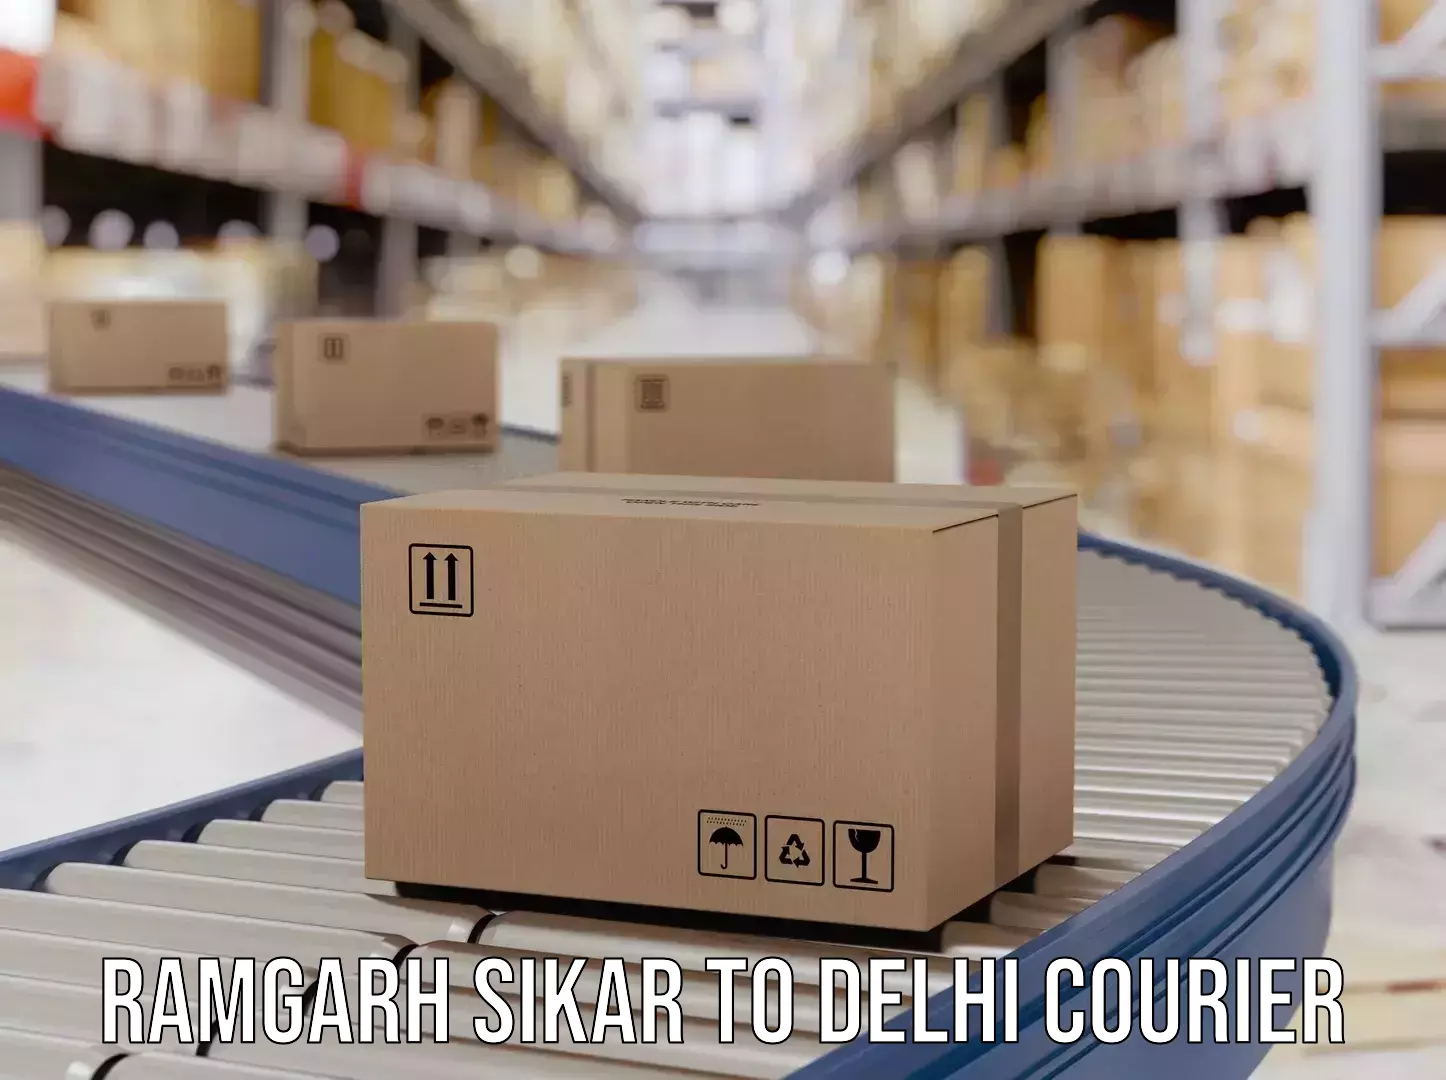 24-hour delivery options Ramgarh Sikar to Indraprastha